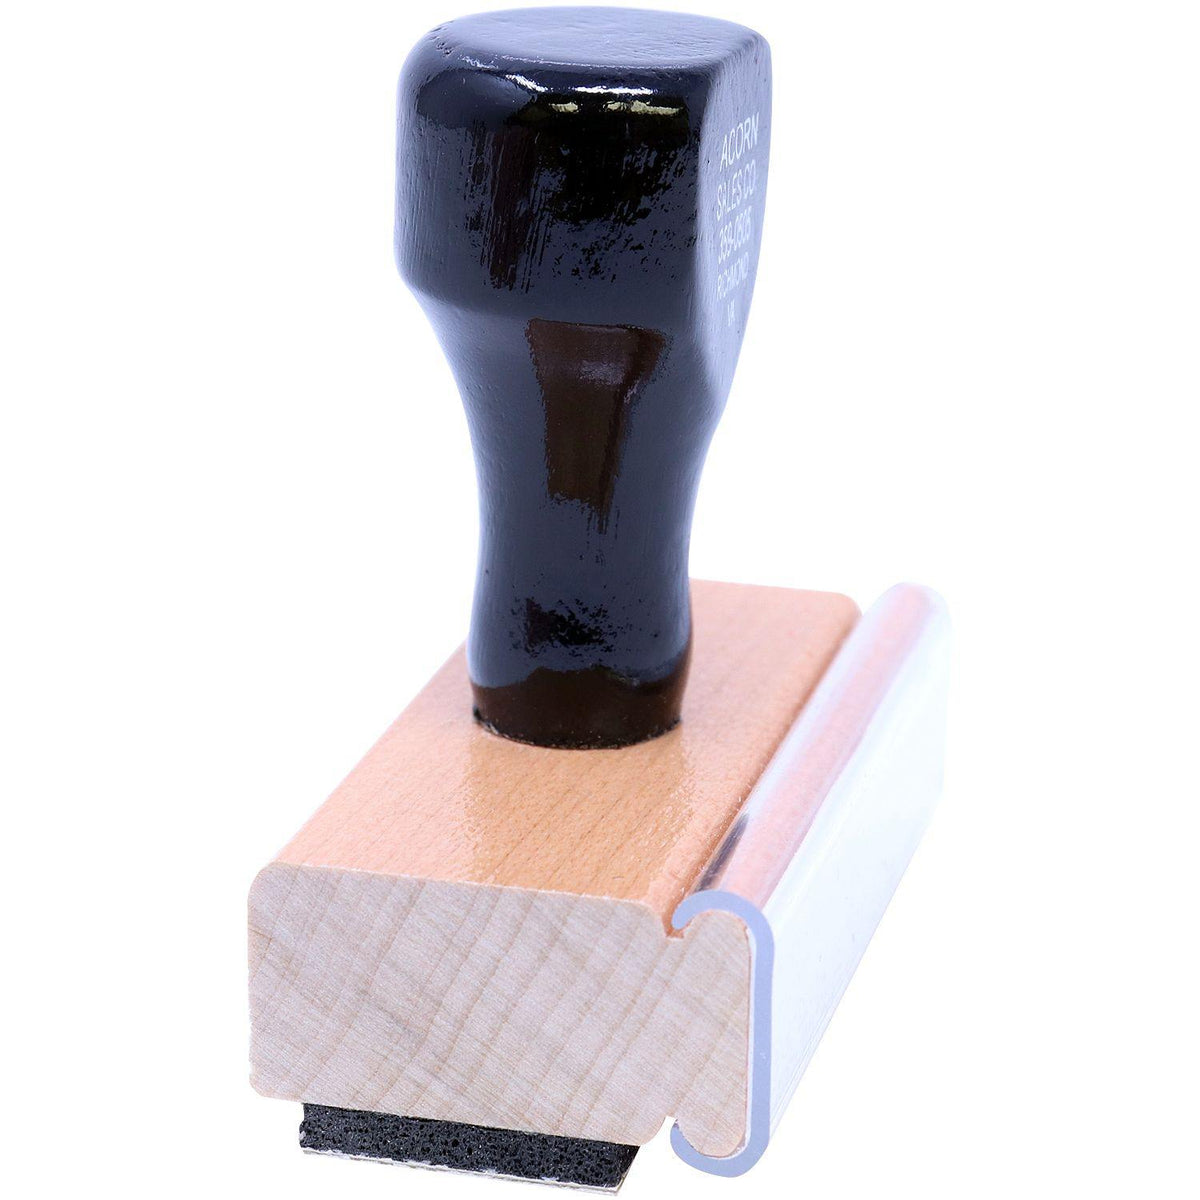 Side View of Large Narrow Expedite Rubber Stamp at an Angle